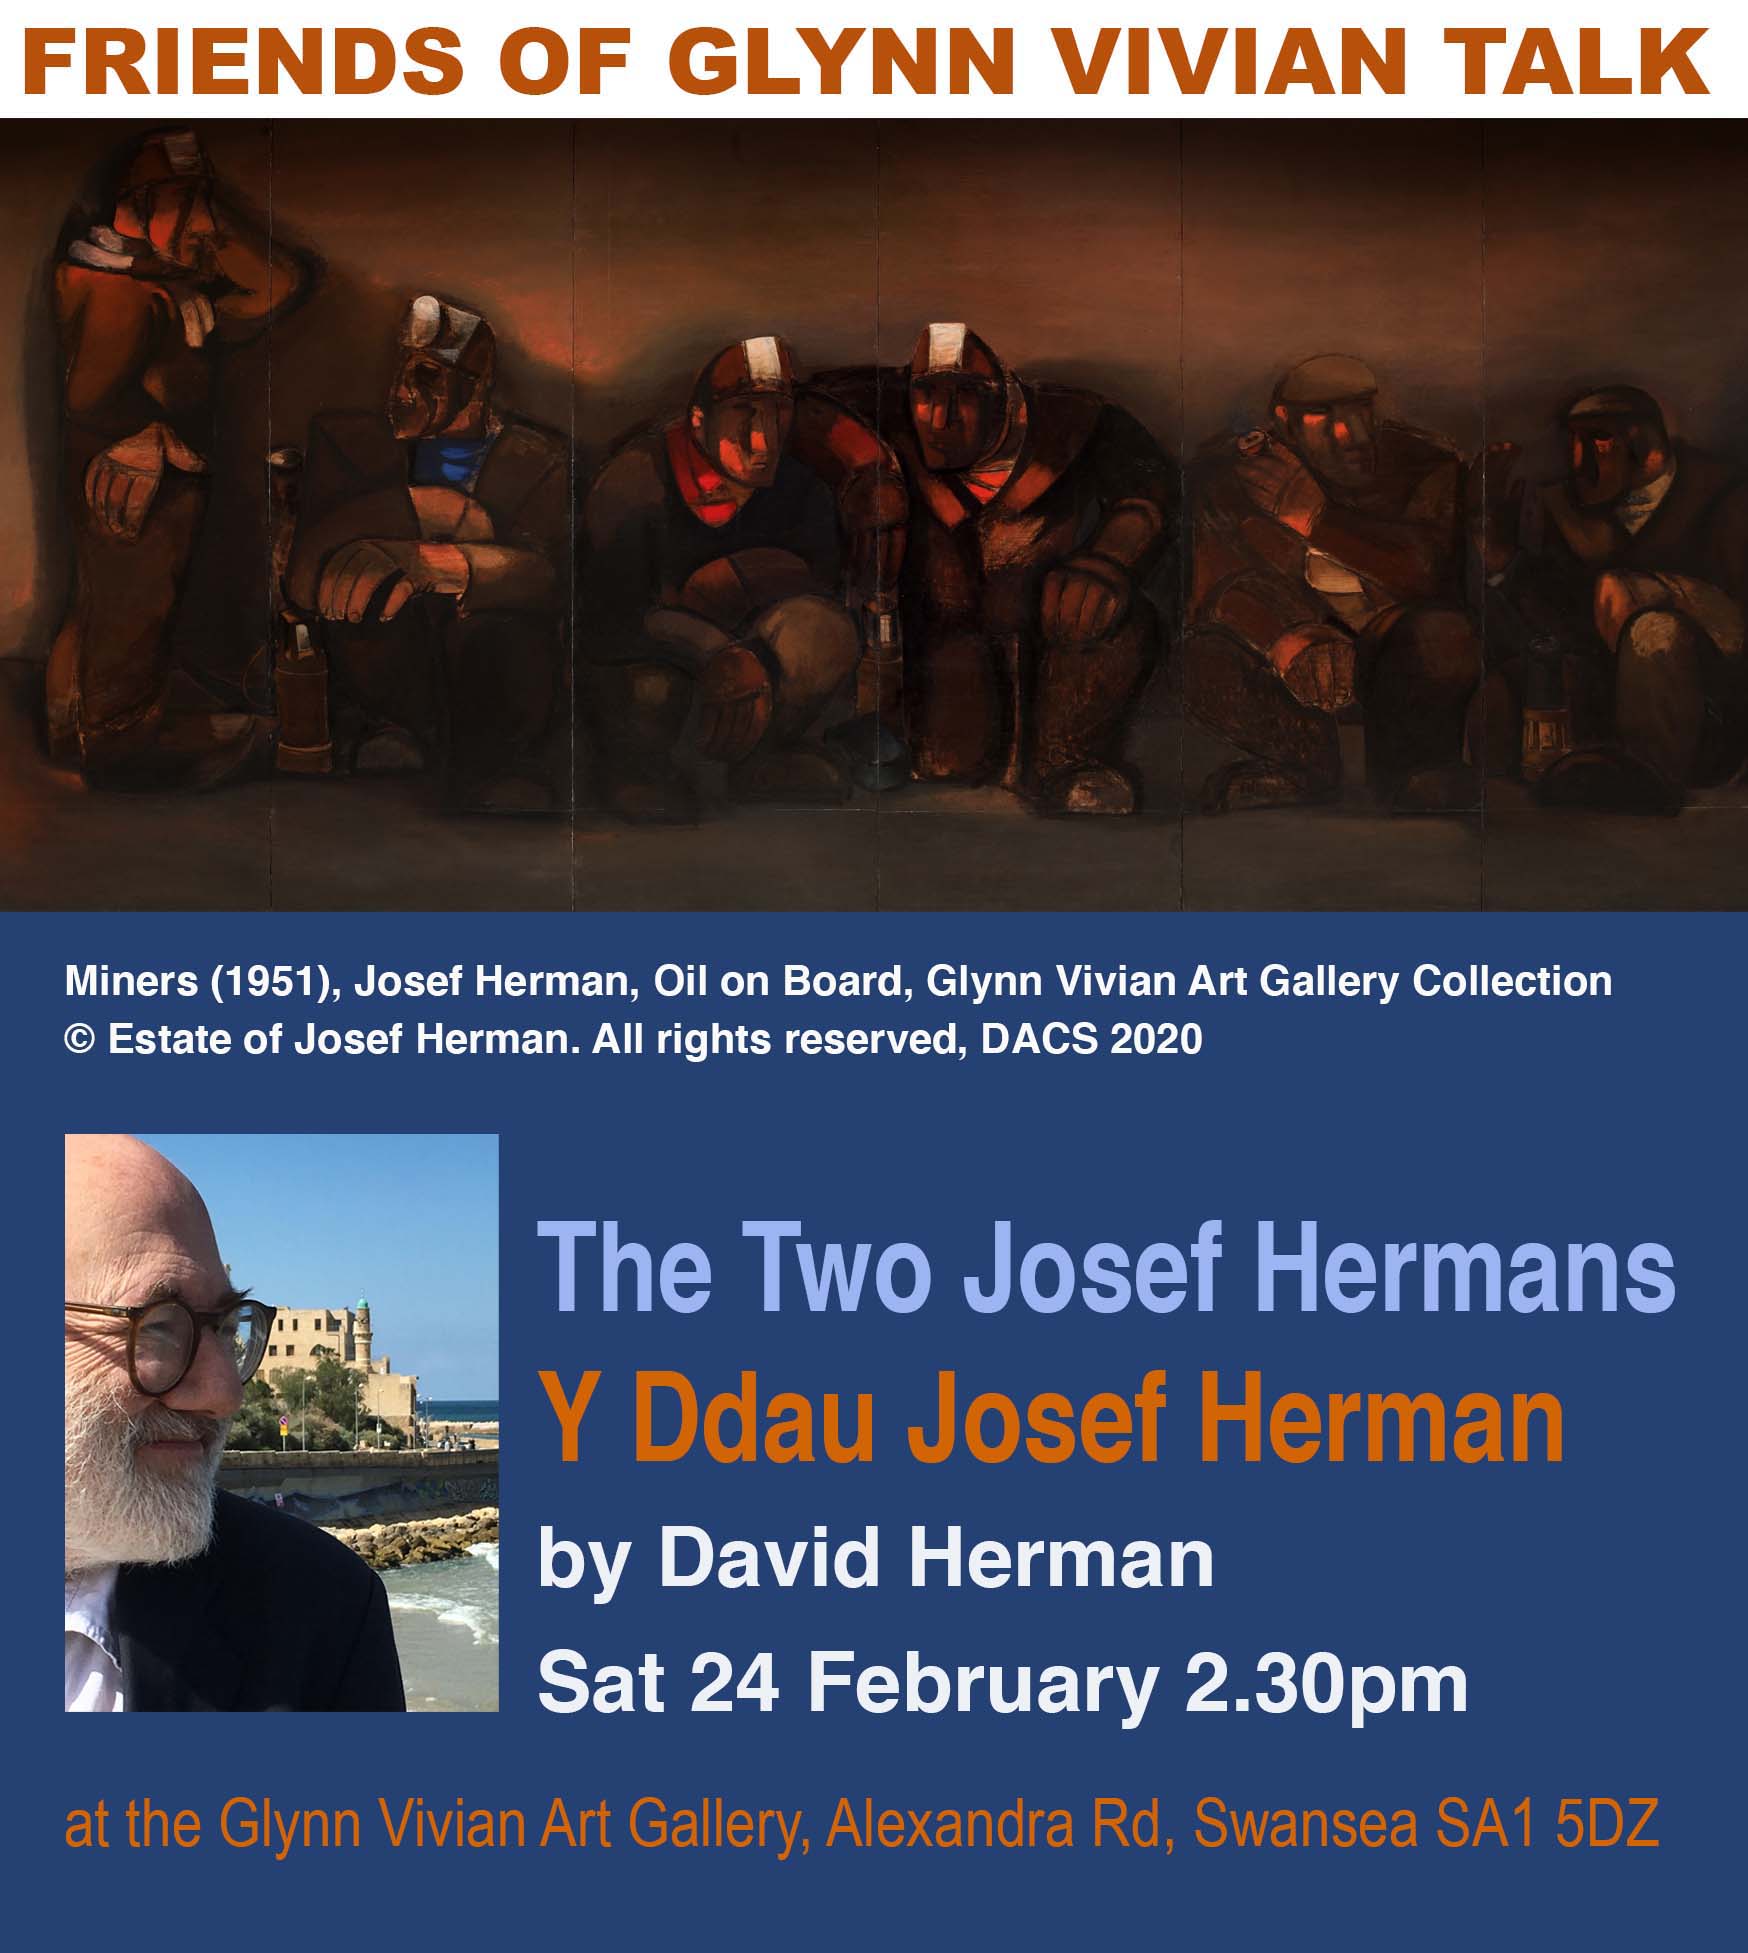 The Two Josef Hermans